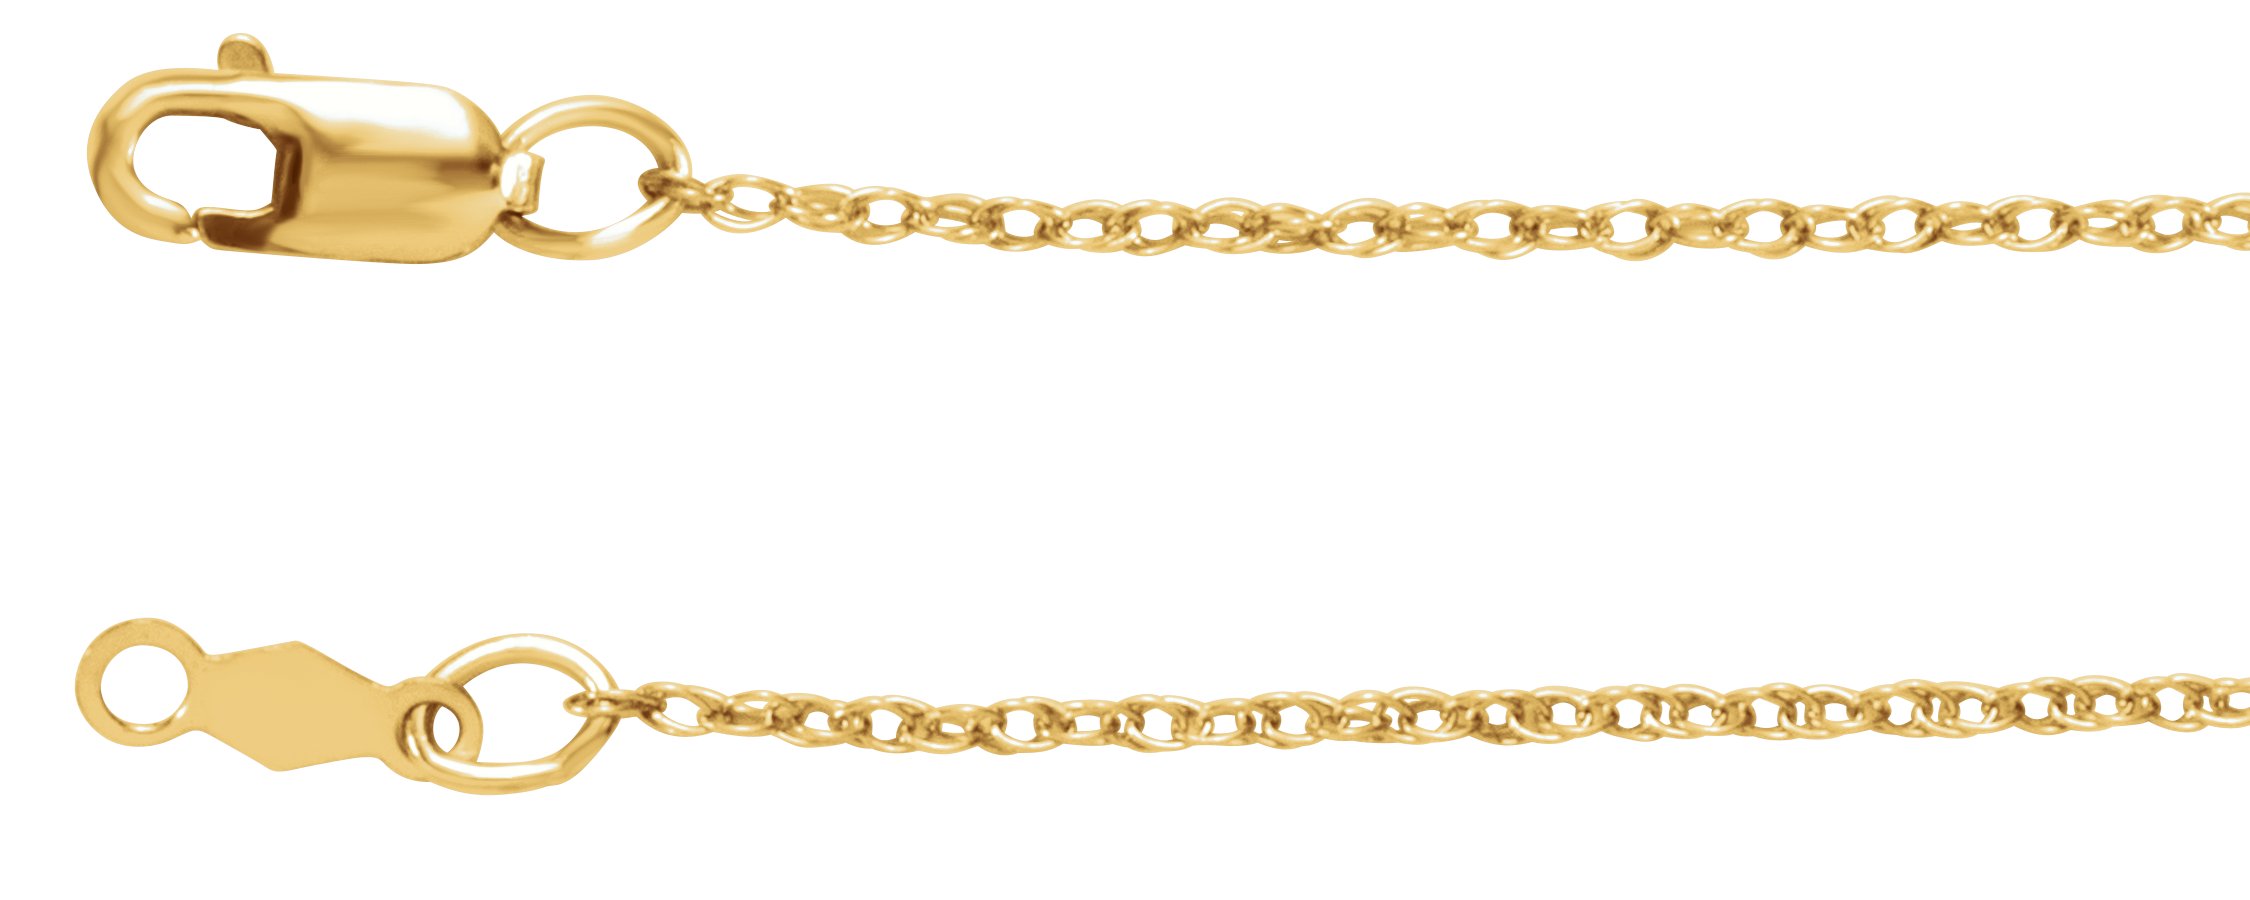 1mm Adjustable Threader Bead Chain Necklace - 14K Yellow Gold